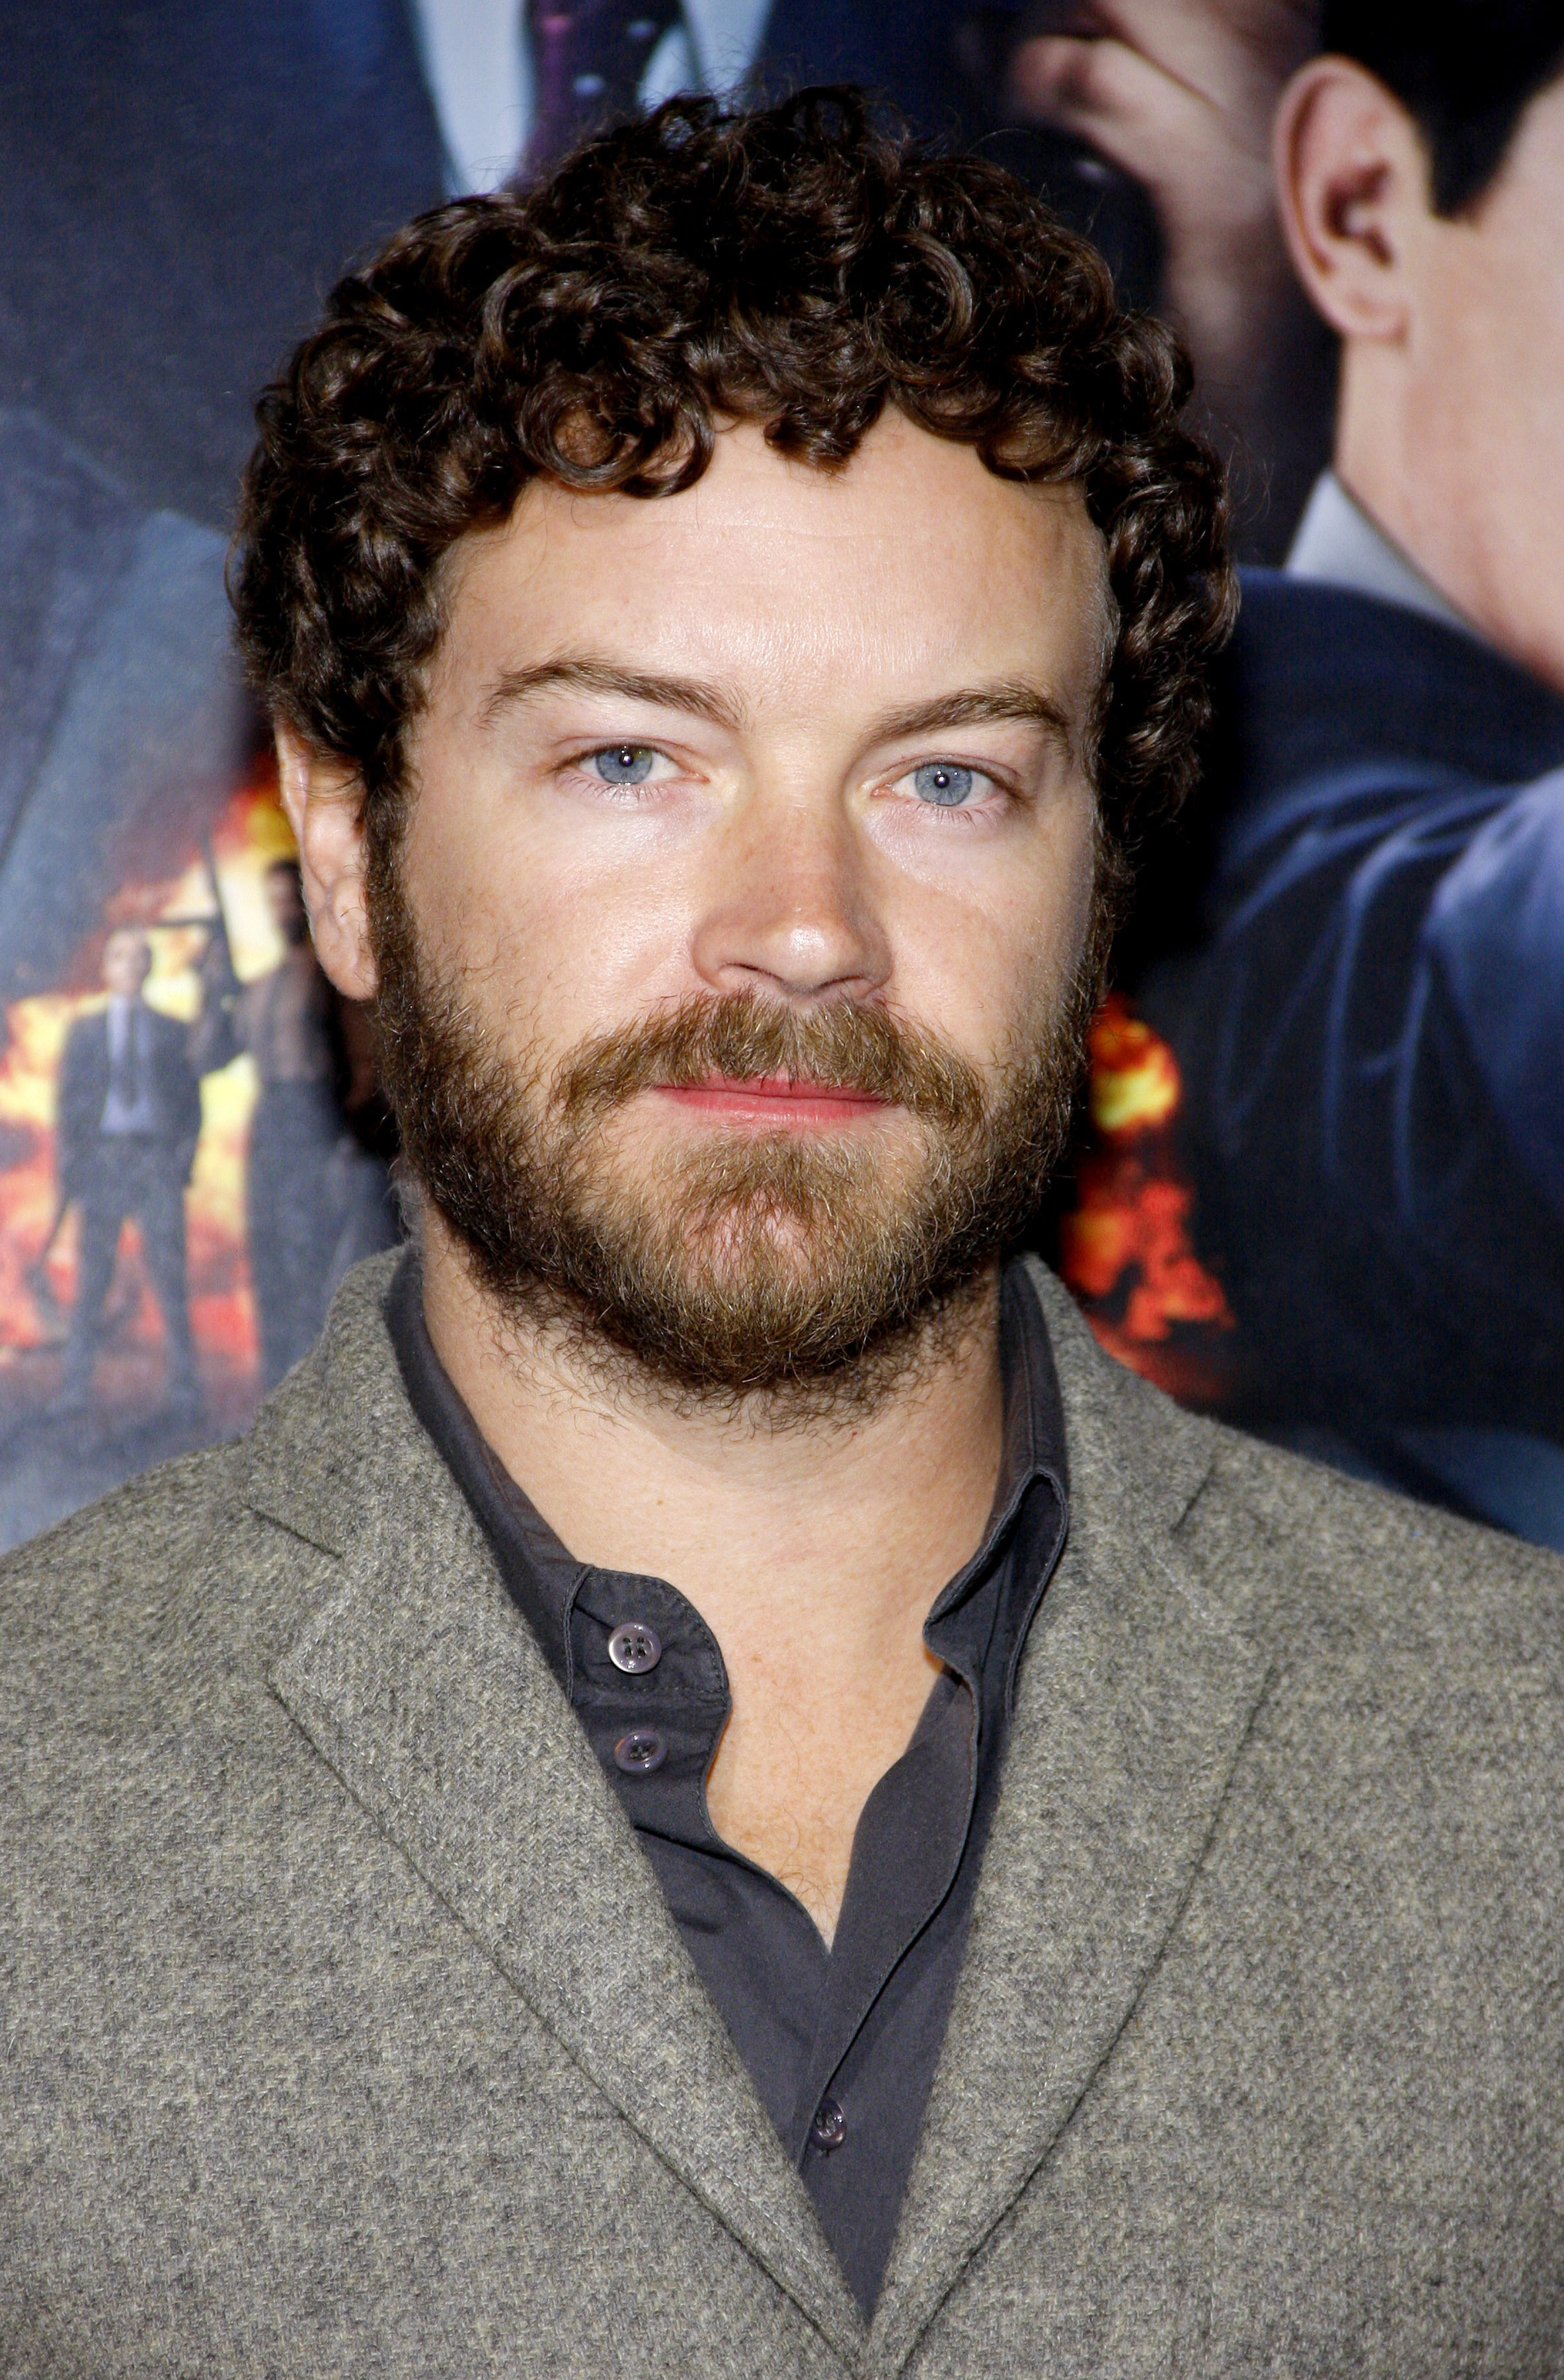 Celebrity Danny Masterson of That ’70s Show Fame, Found Guilty of Rape by Los Angeles Court